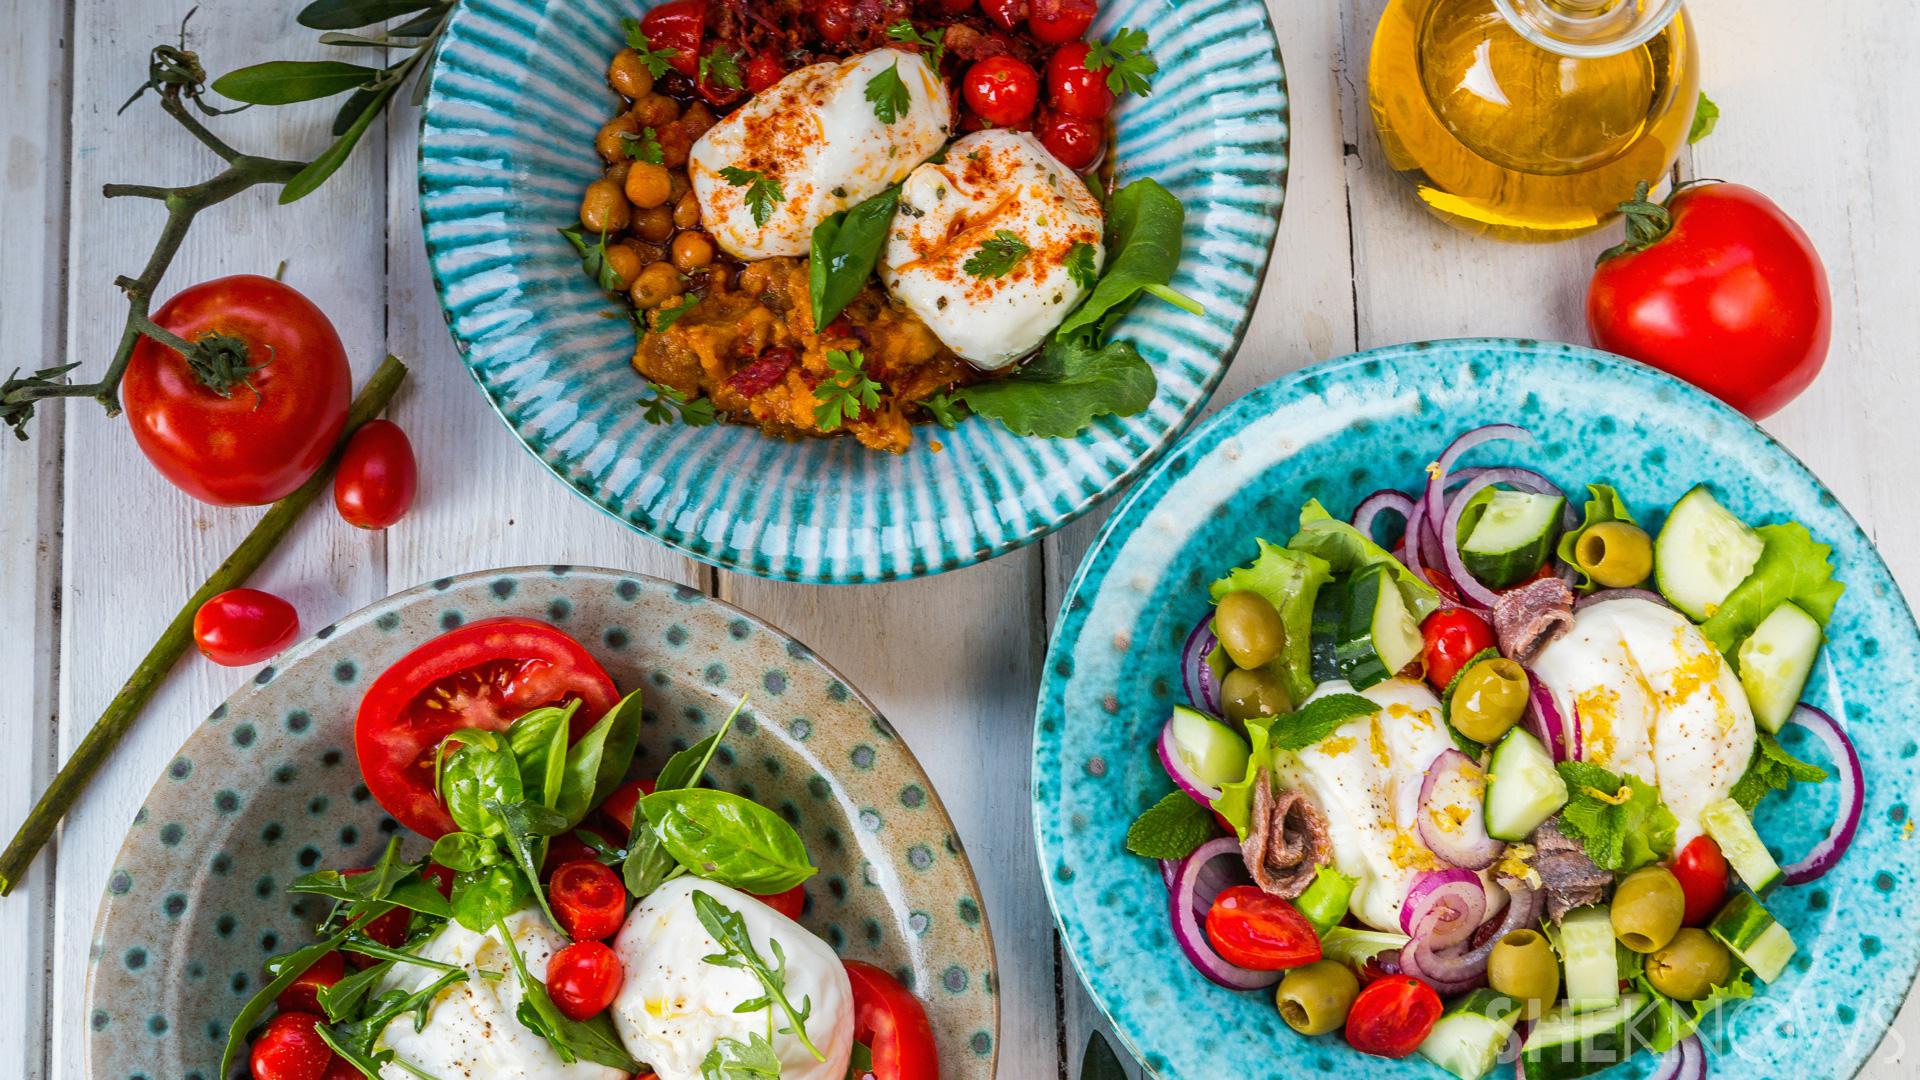 You can't resist these 3 Mediterranean-style salads with a special ...